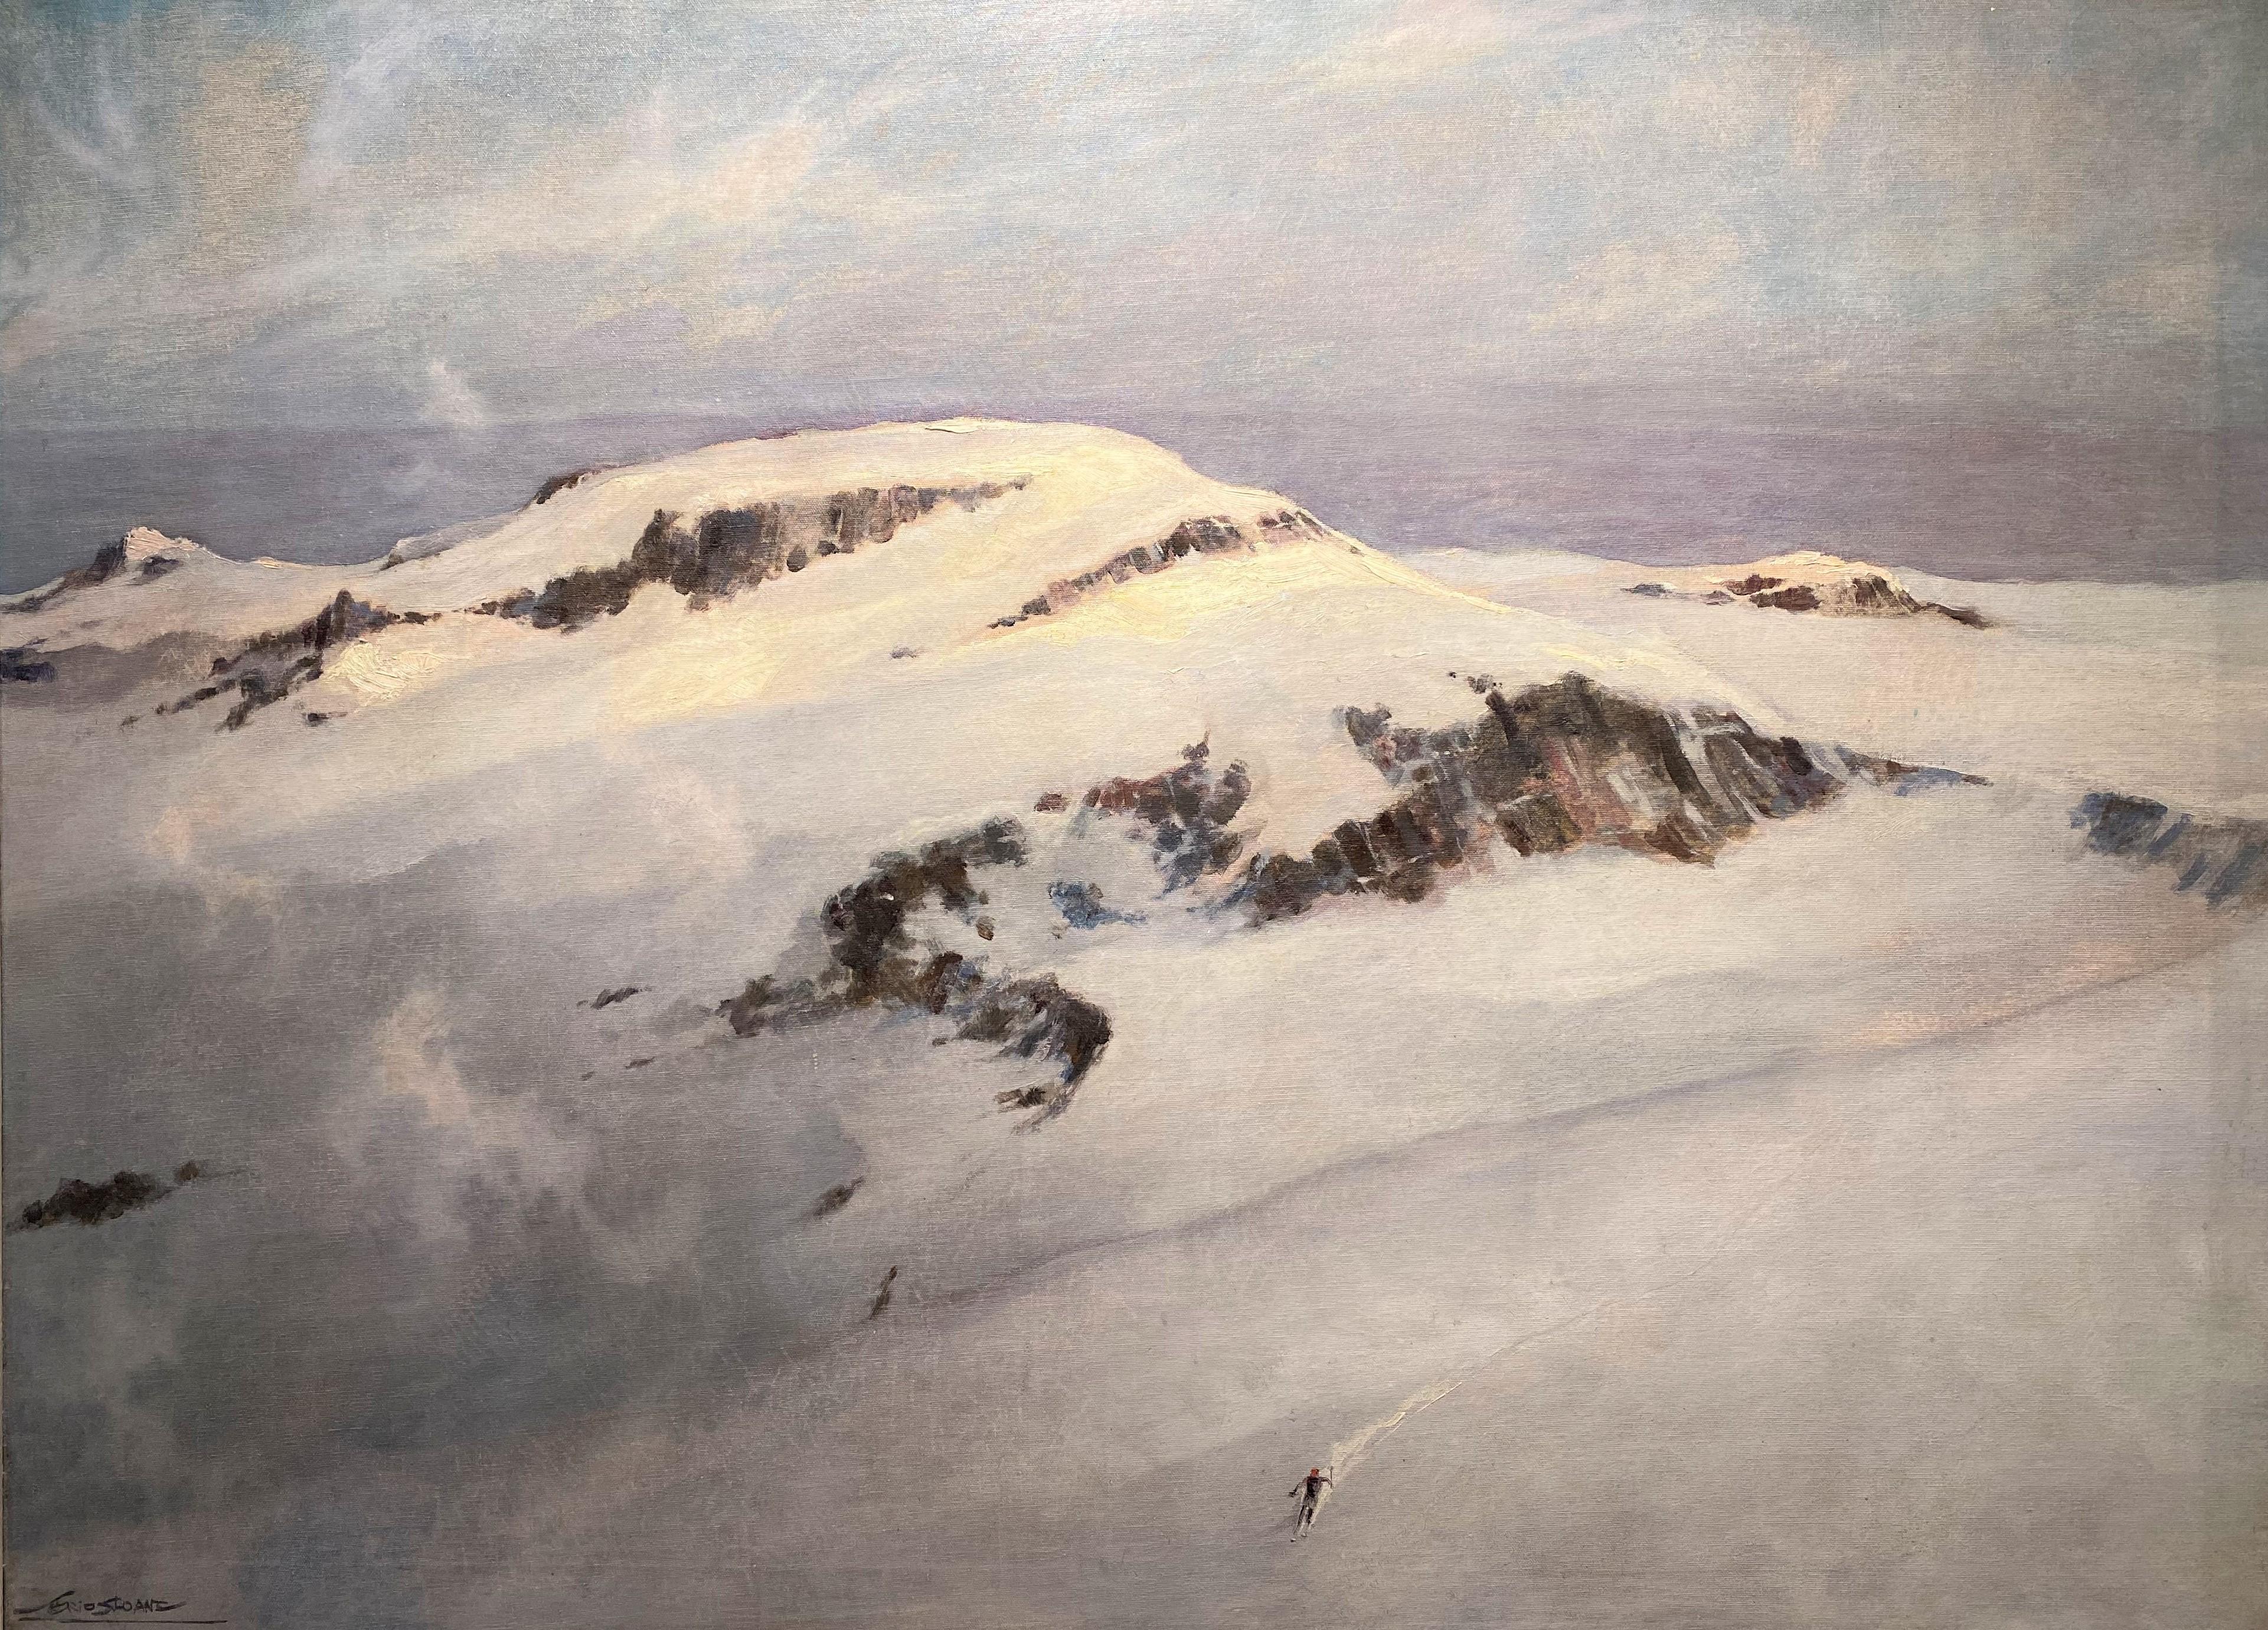 Winter Mountain Landscape with Skier - Painting by Eric Sloane